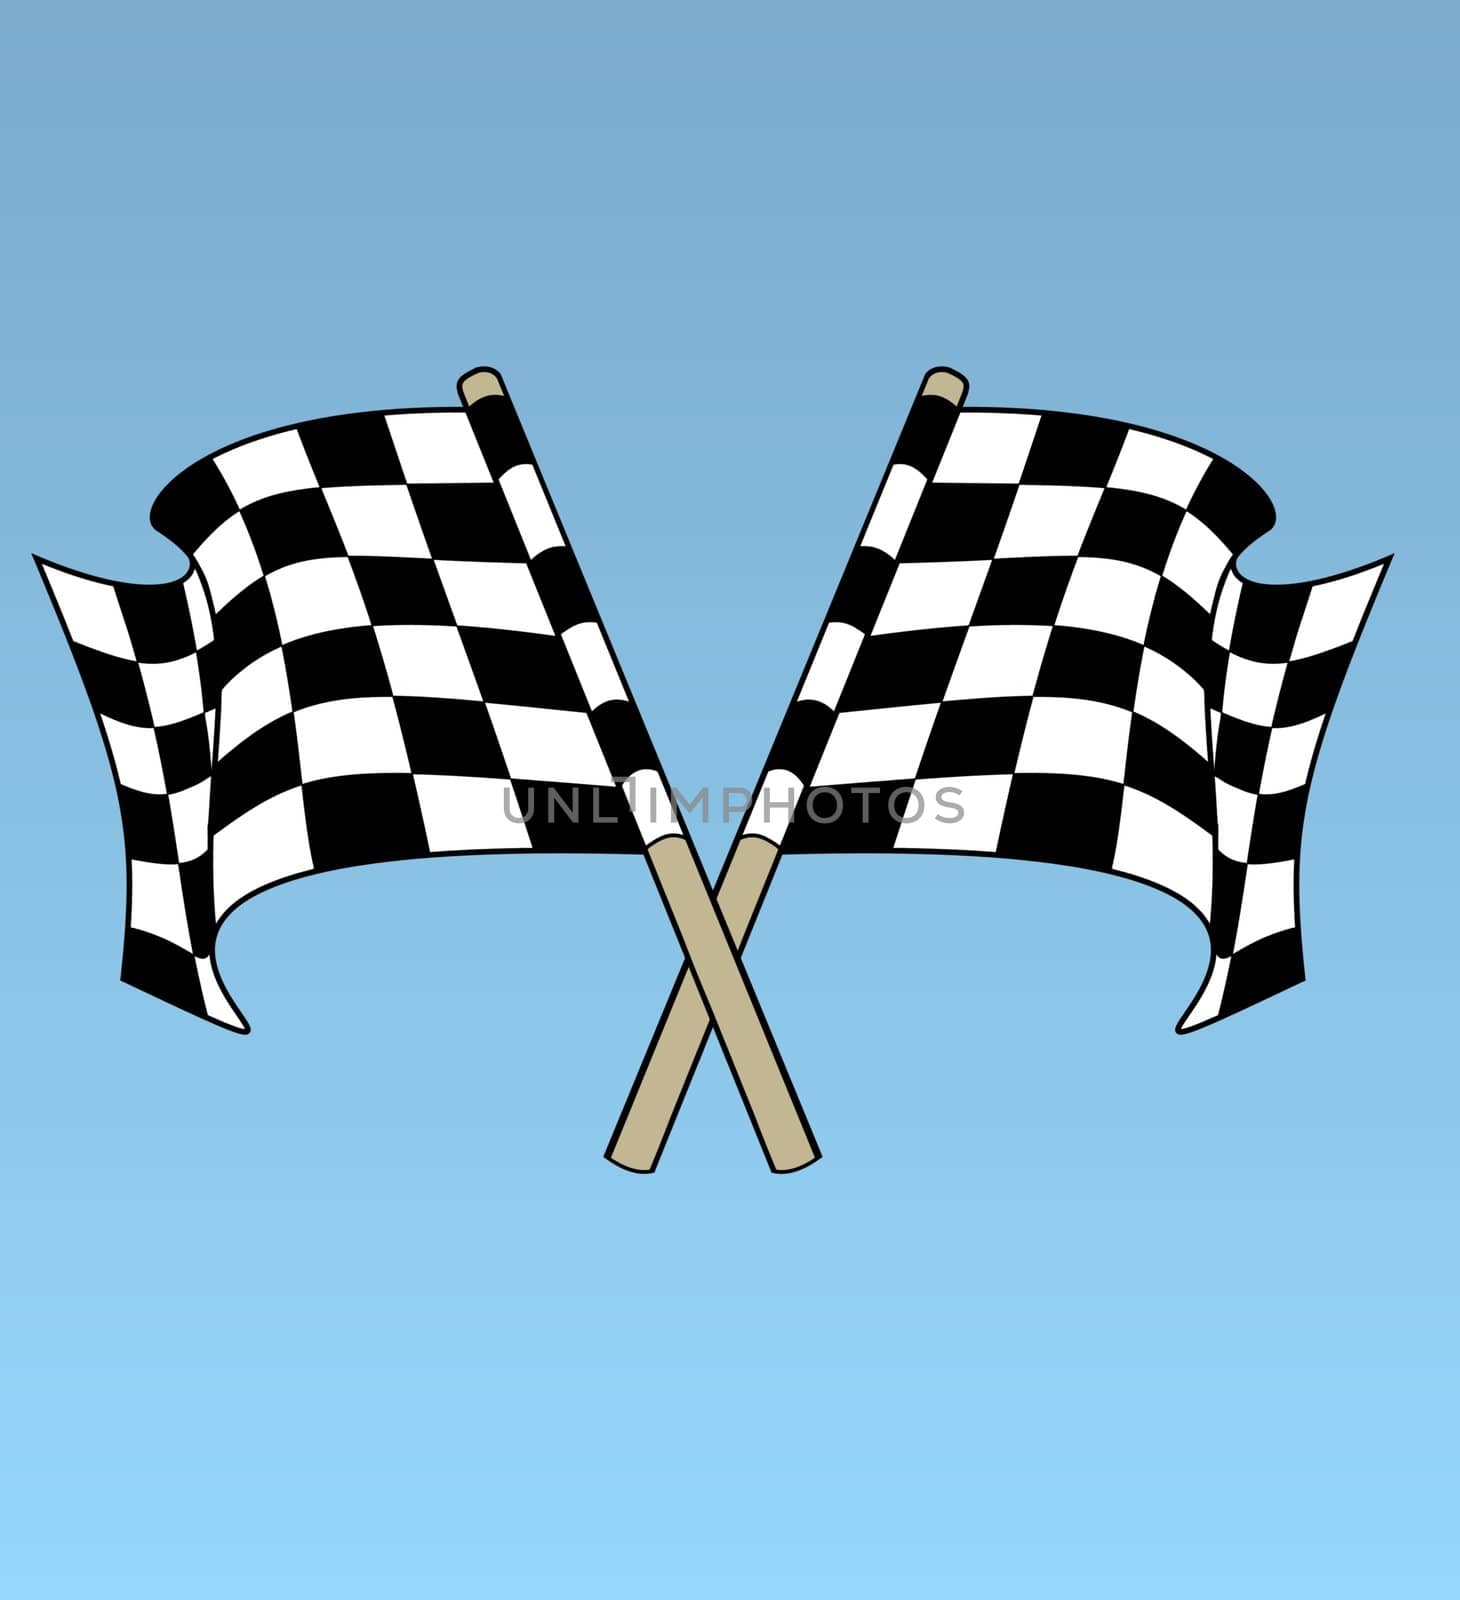 Illustration of two chequered flags overlapping